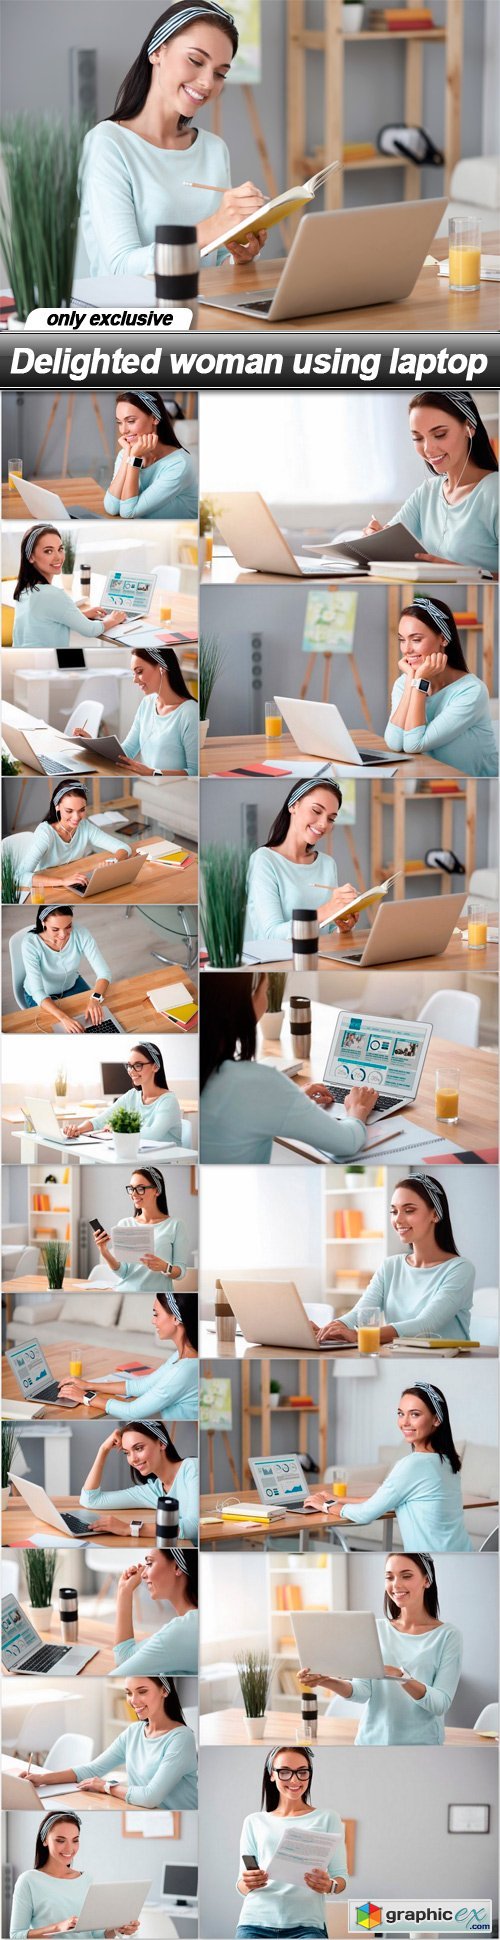 Delighted woman using laptop - 20 UHQ JPEG